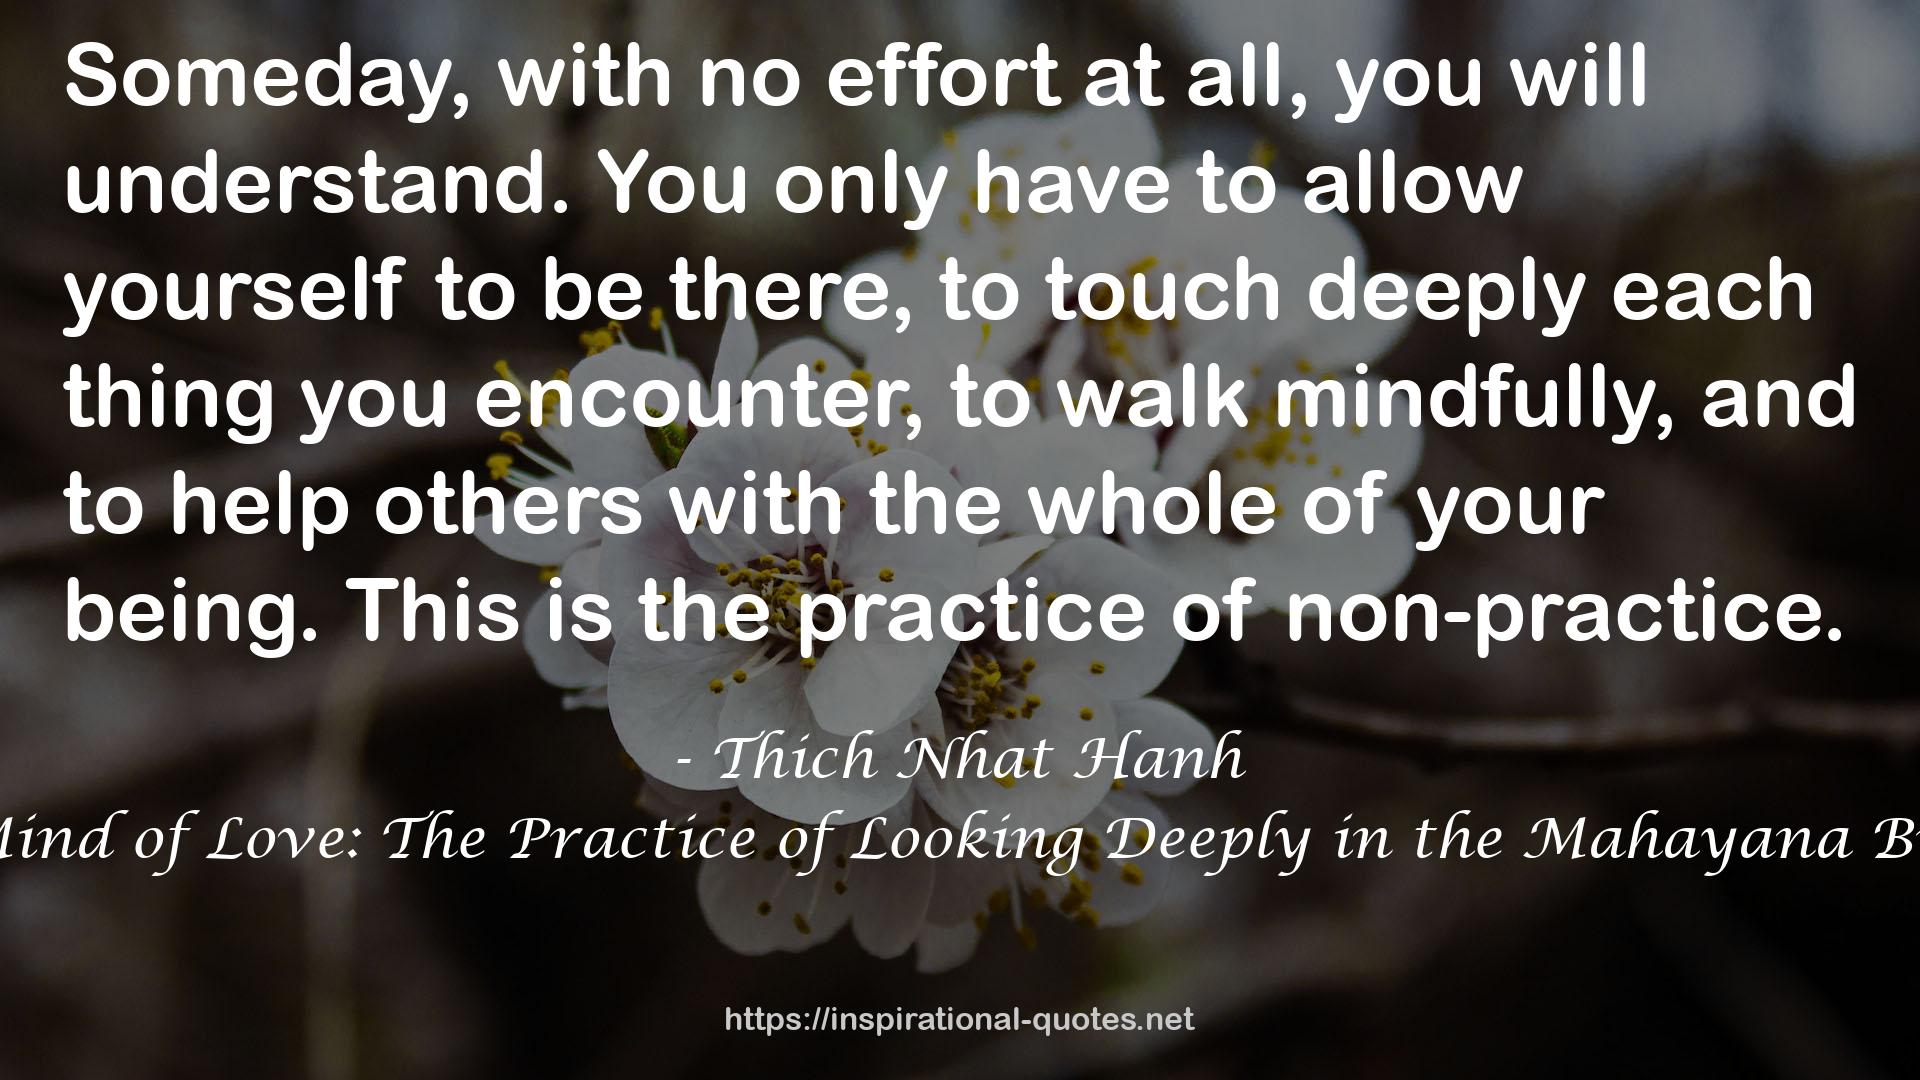 Cultivating the Mind of Love: The Practice of Looking Deeply in the Mahayana Buddhist Tradition QUOTES